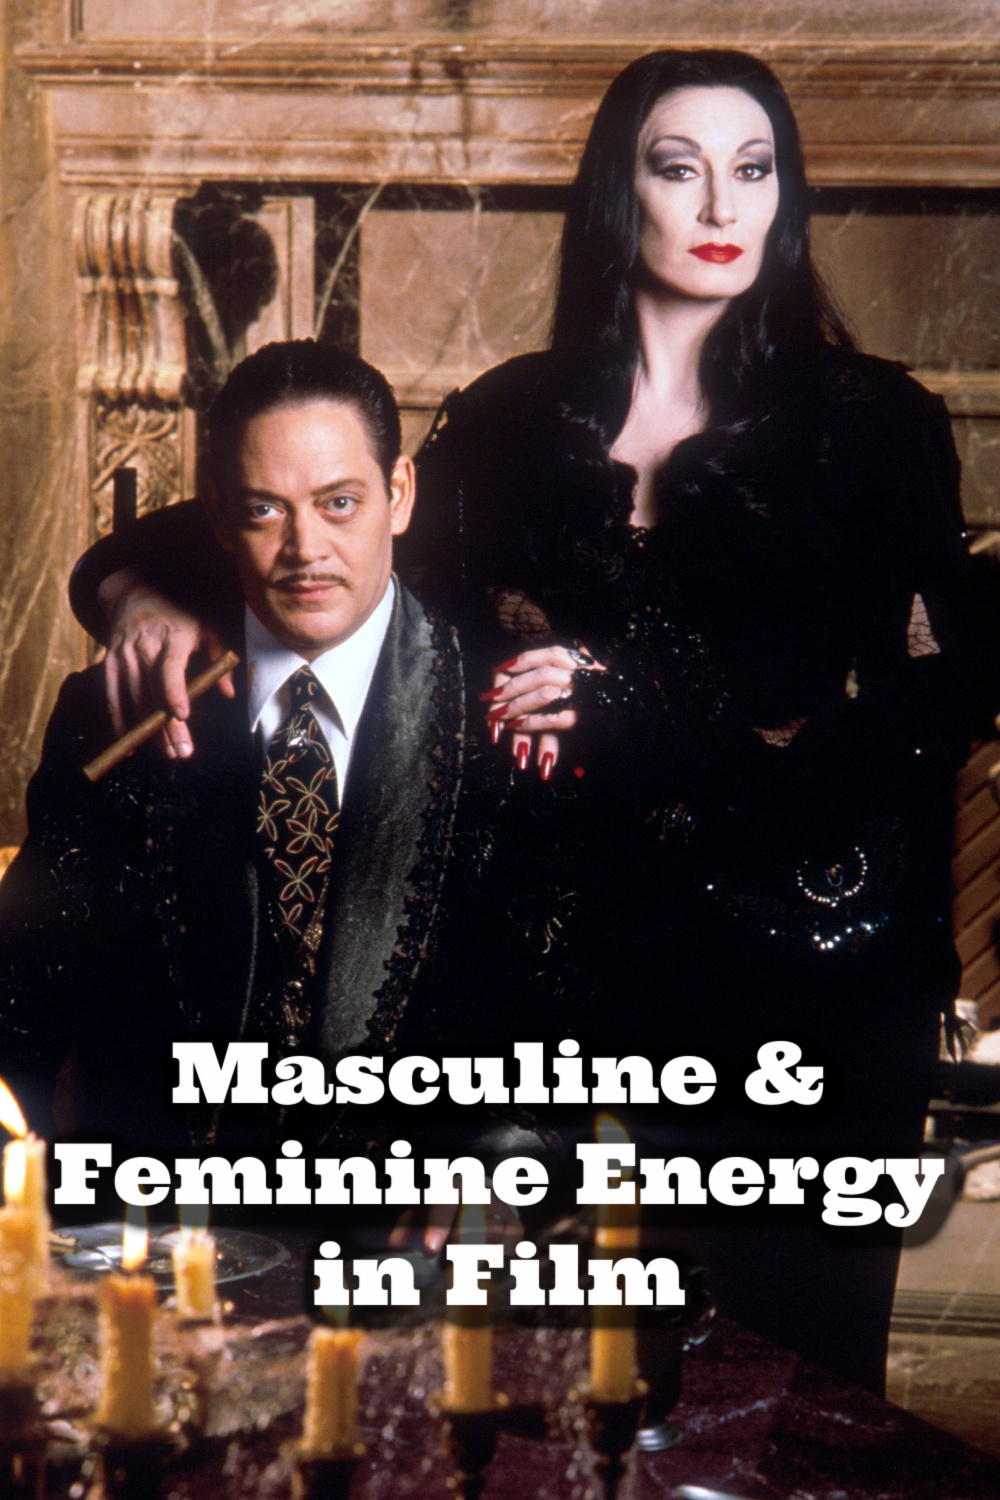 addams family film breakdown, review film the addams family, the addams family film review, feminine film, femininity in film, masculine and feminine examples, feminine films, femininity in movies, masculine feminine film, understanding masculine and feminine energy, understanding masculine and feminine energy beginners guide, feminine and masculine energy in relationships, difference between feminine and masculine energy, divine masculine and feminine healing energy, feminine energy, feminine and masculine energy balance, feminine and masculine energy traits, feminine masculine energy, feminine energy vs masculine energy, masculine energy, masculine energy vs feminine energy, masculine vs feminine, addams family movie 1991, addams family movie scene, Everyday starlet, sarah blodgett,